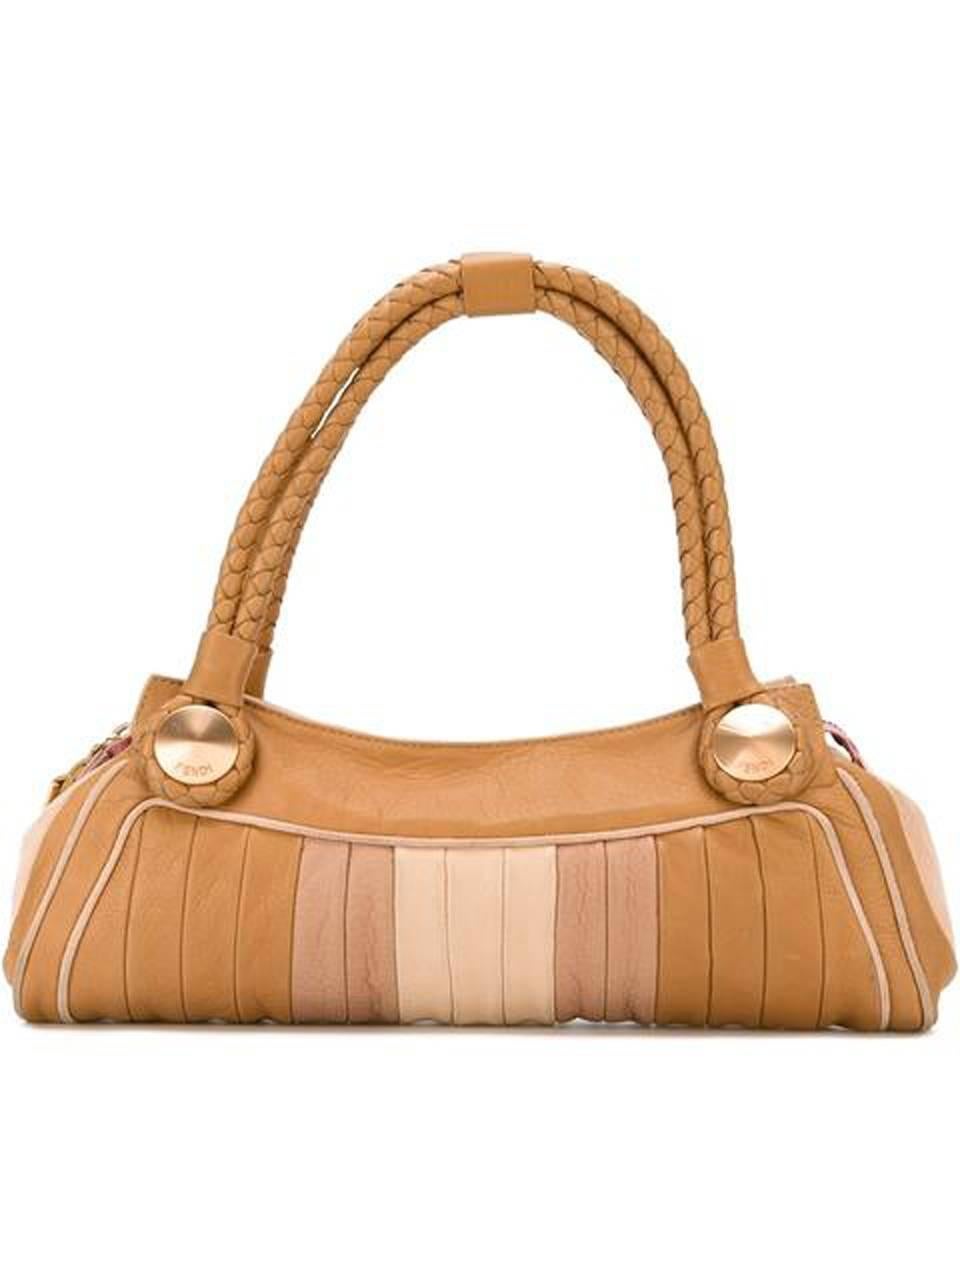 Fendi pastel leather paneled tote baguette bag featuring a ribbed design, a contrast piped trim, bronze-tone hardware, braided handles, a top zip fastening, an internal slip pocket and an internal logo plaque. 
In excellent vintage condition. Made